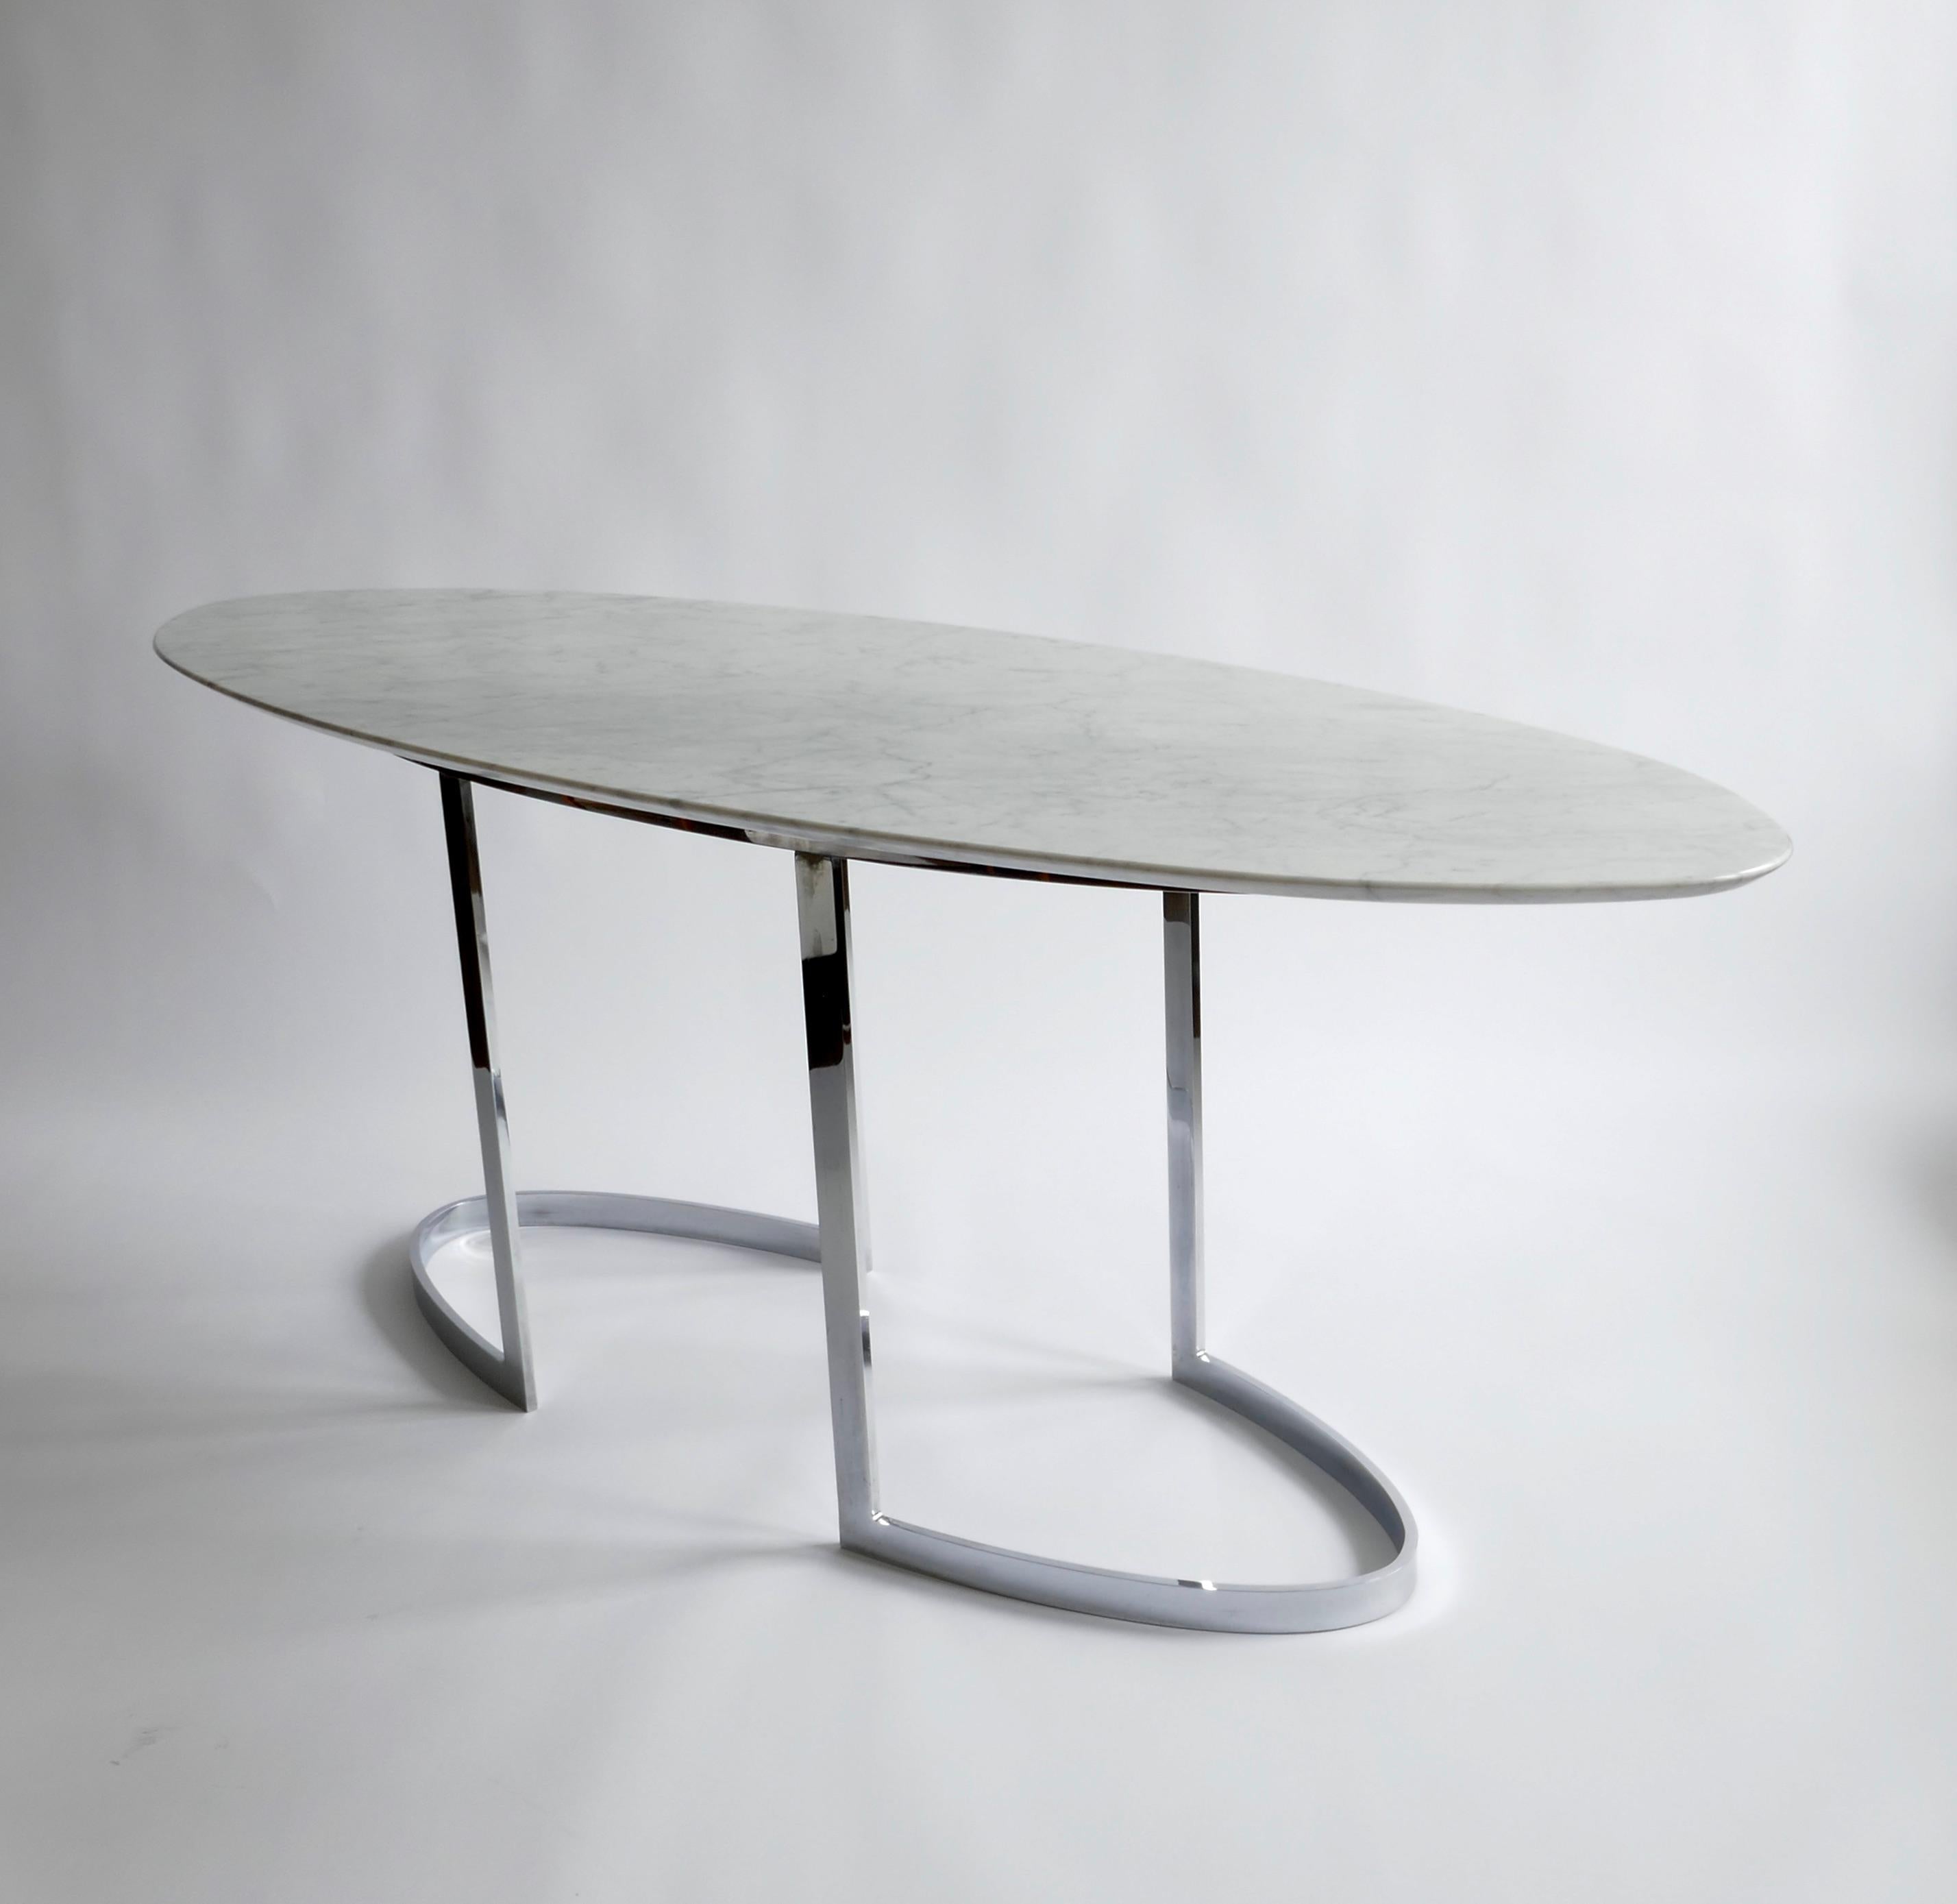 Carrara Marble Console Table with Chrome Legs by Vittorio Introini, Italy, 1970s For Sale 3